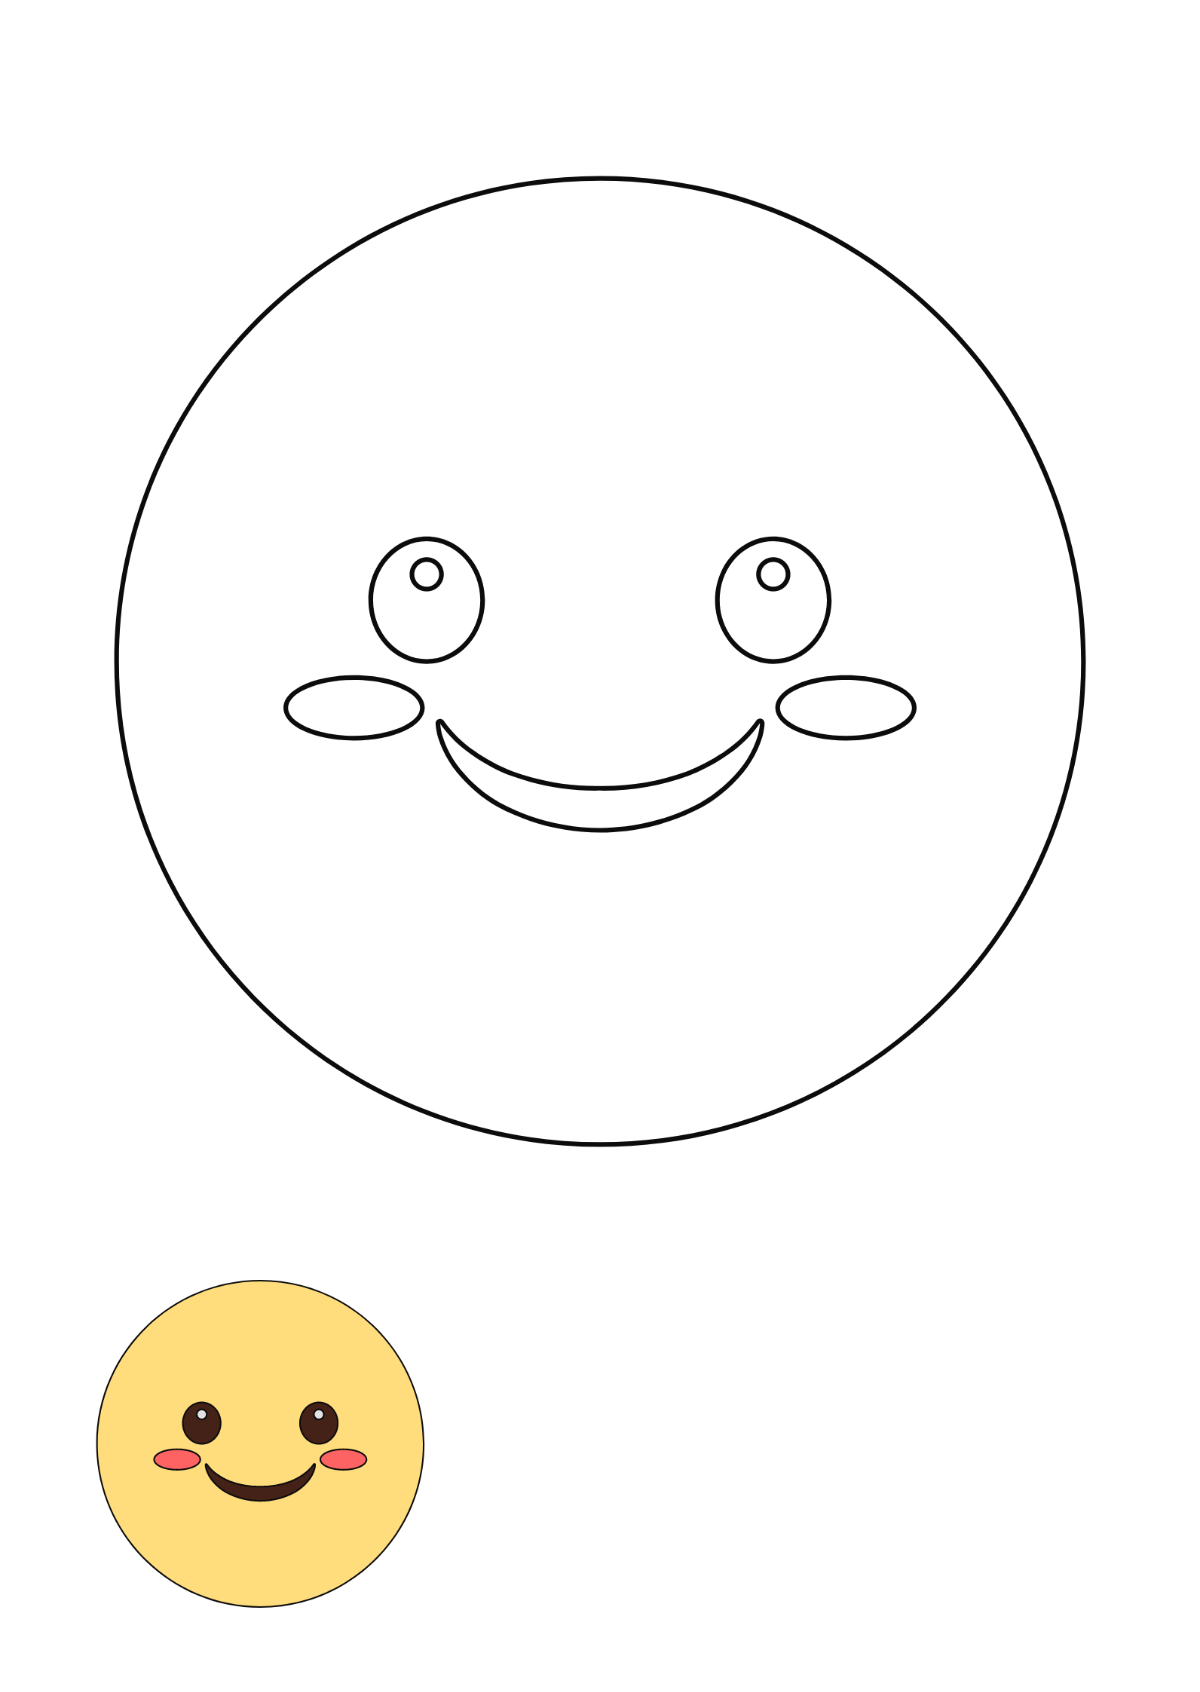 Cute Smiley coloring page Template